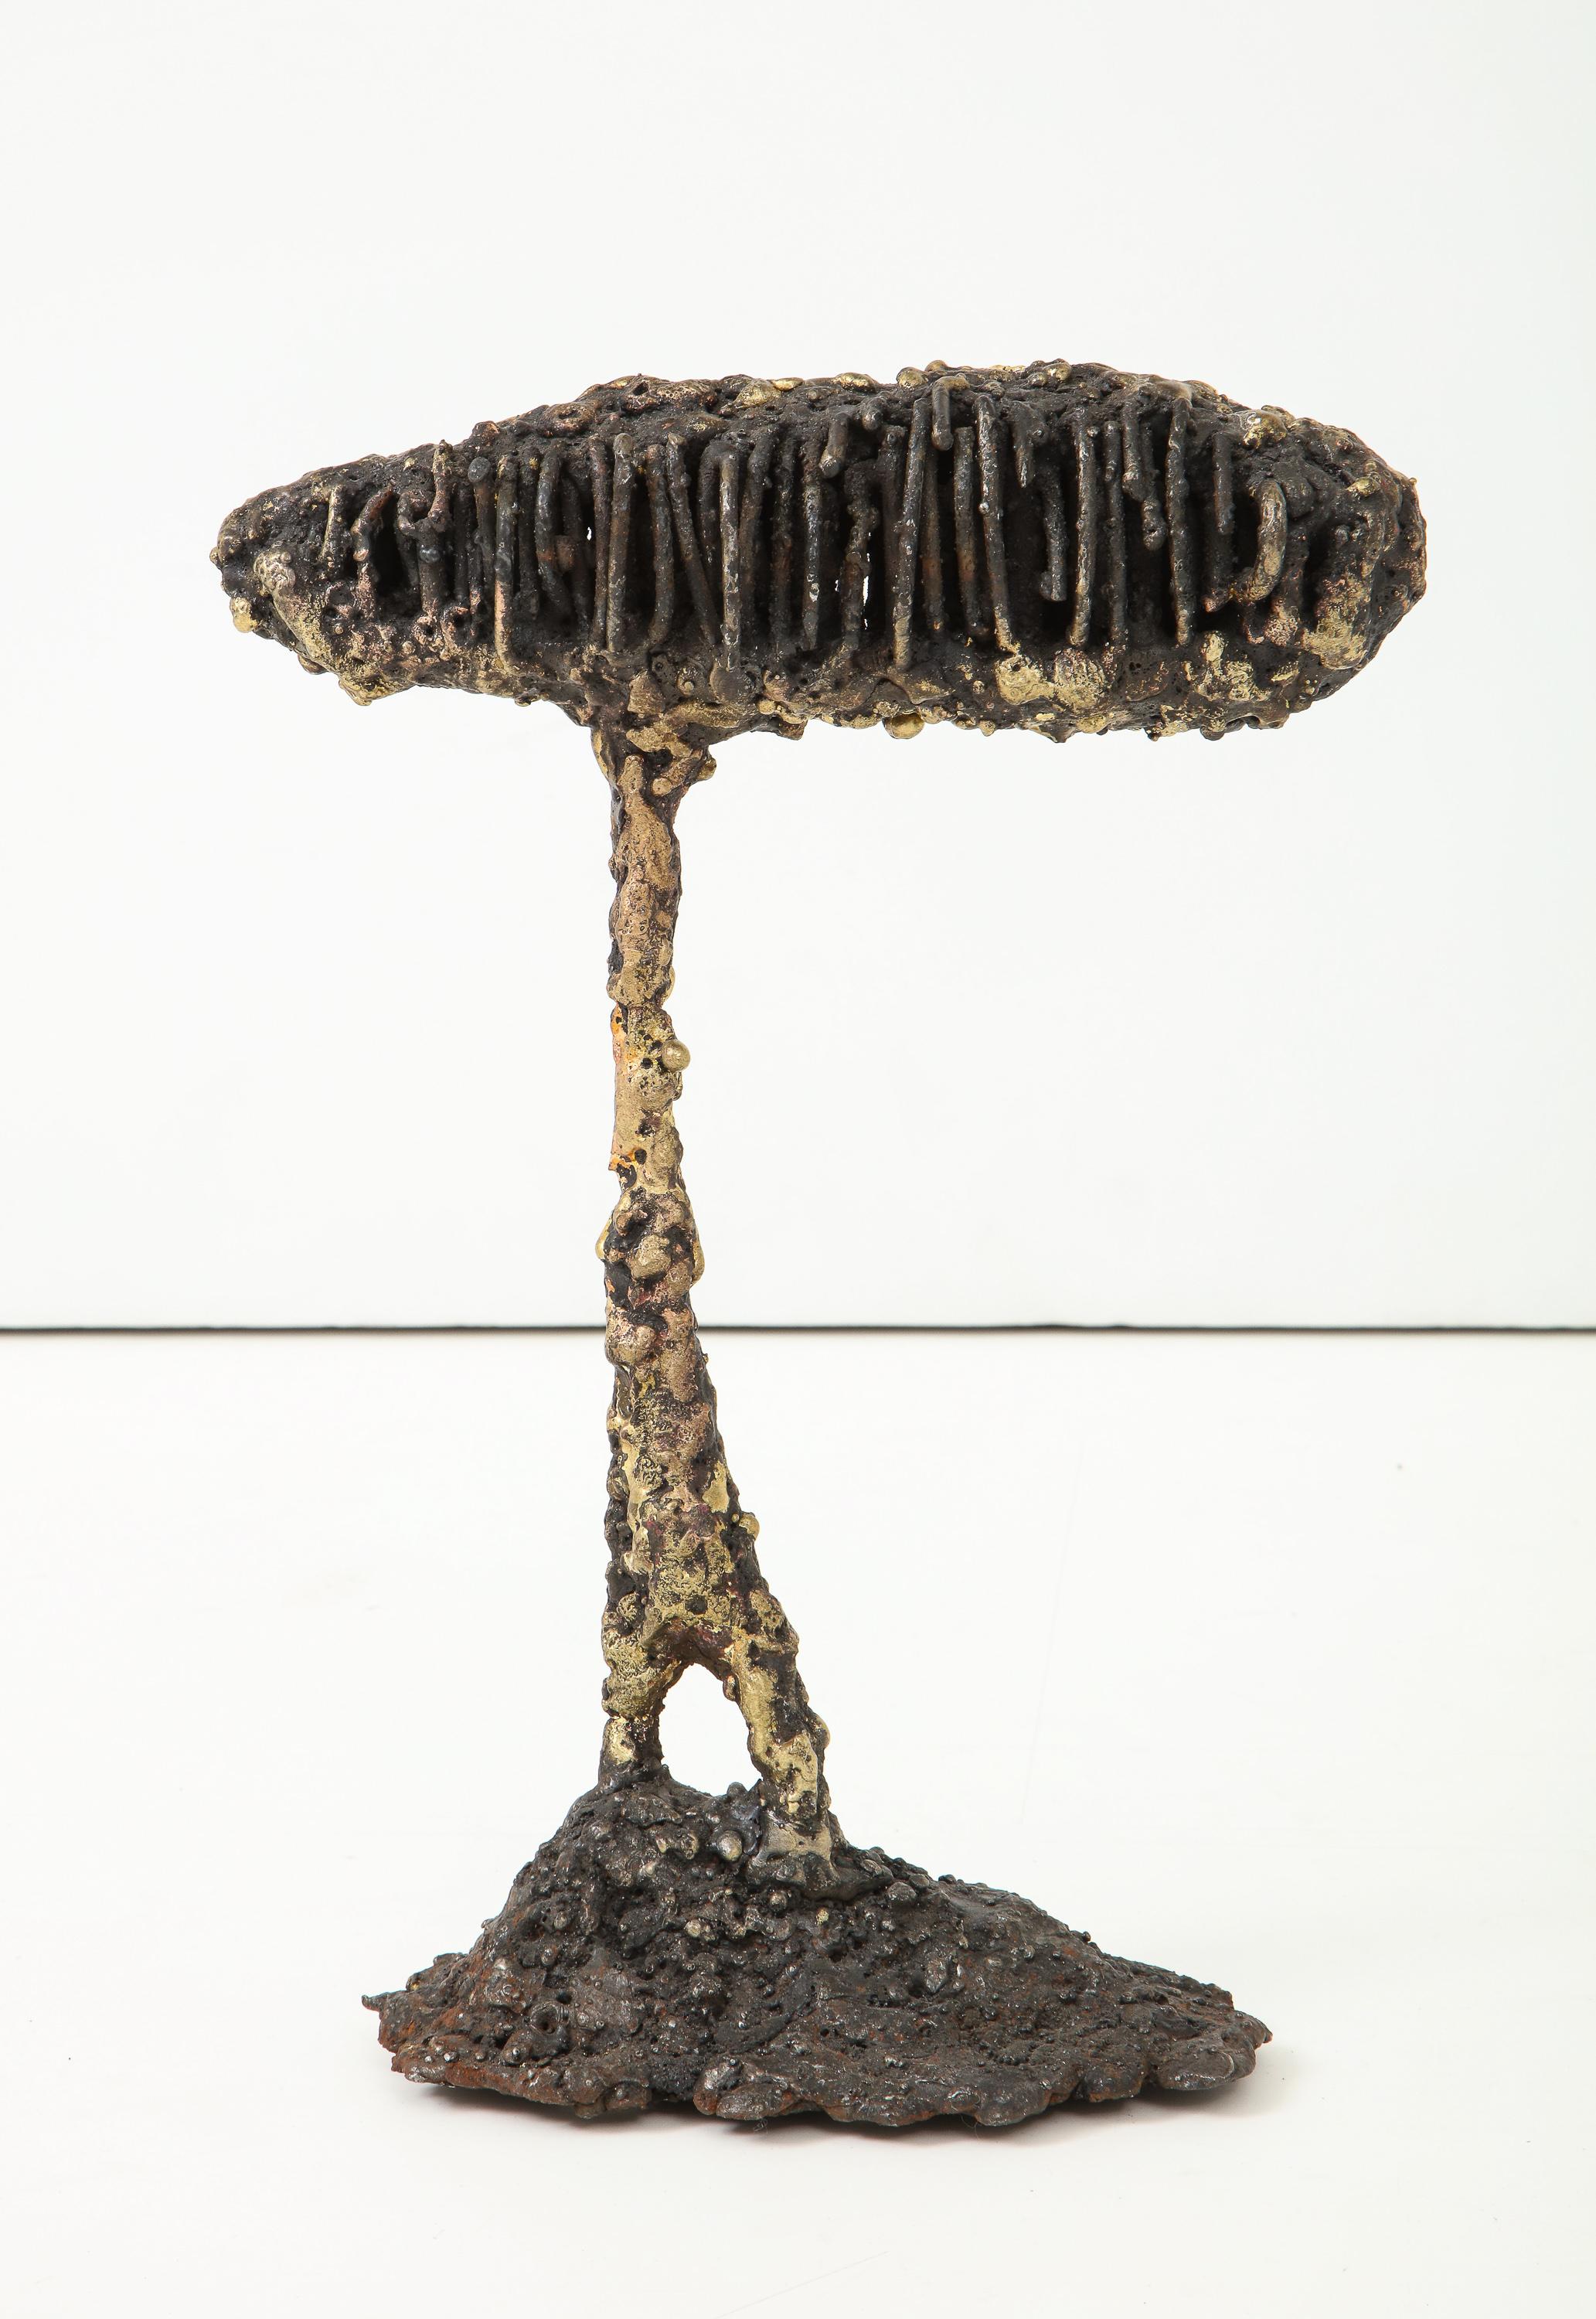 Abstract sculpture of torch-cut steel and bronze by American artist James Bearden. From his “Woven” series, 2019. Bearden's work was featured in a 2020 solo exhibition at the NY Design Center titled 